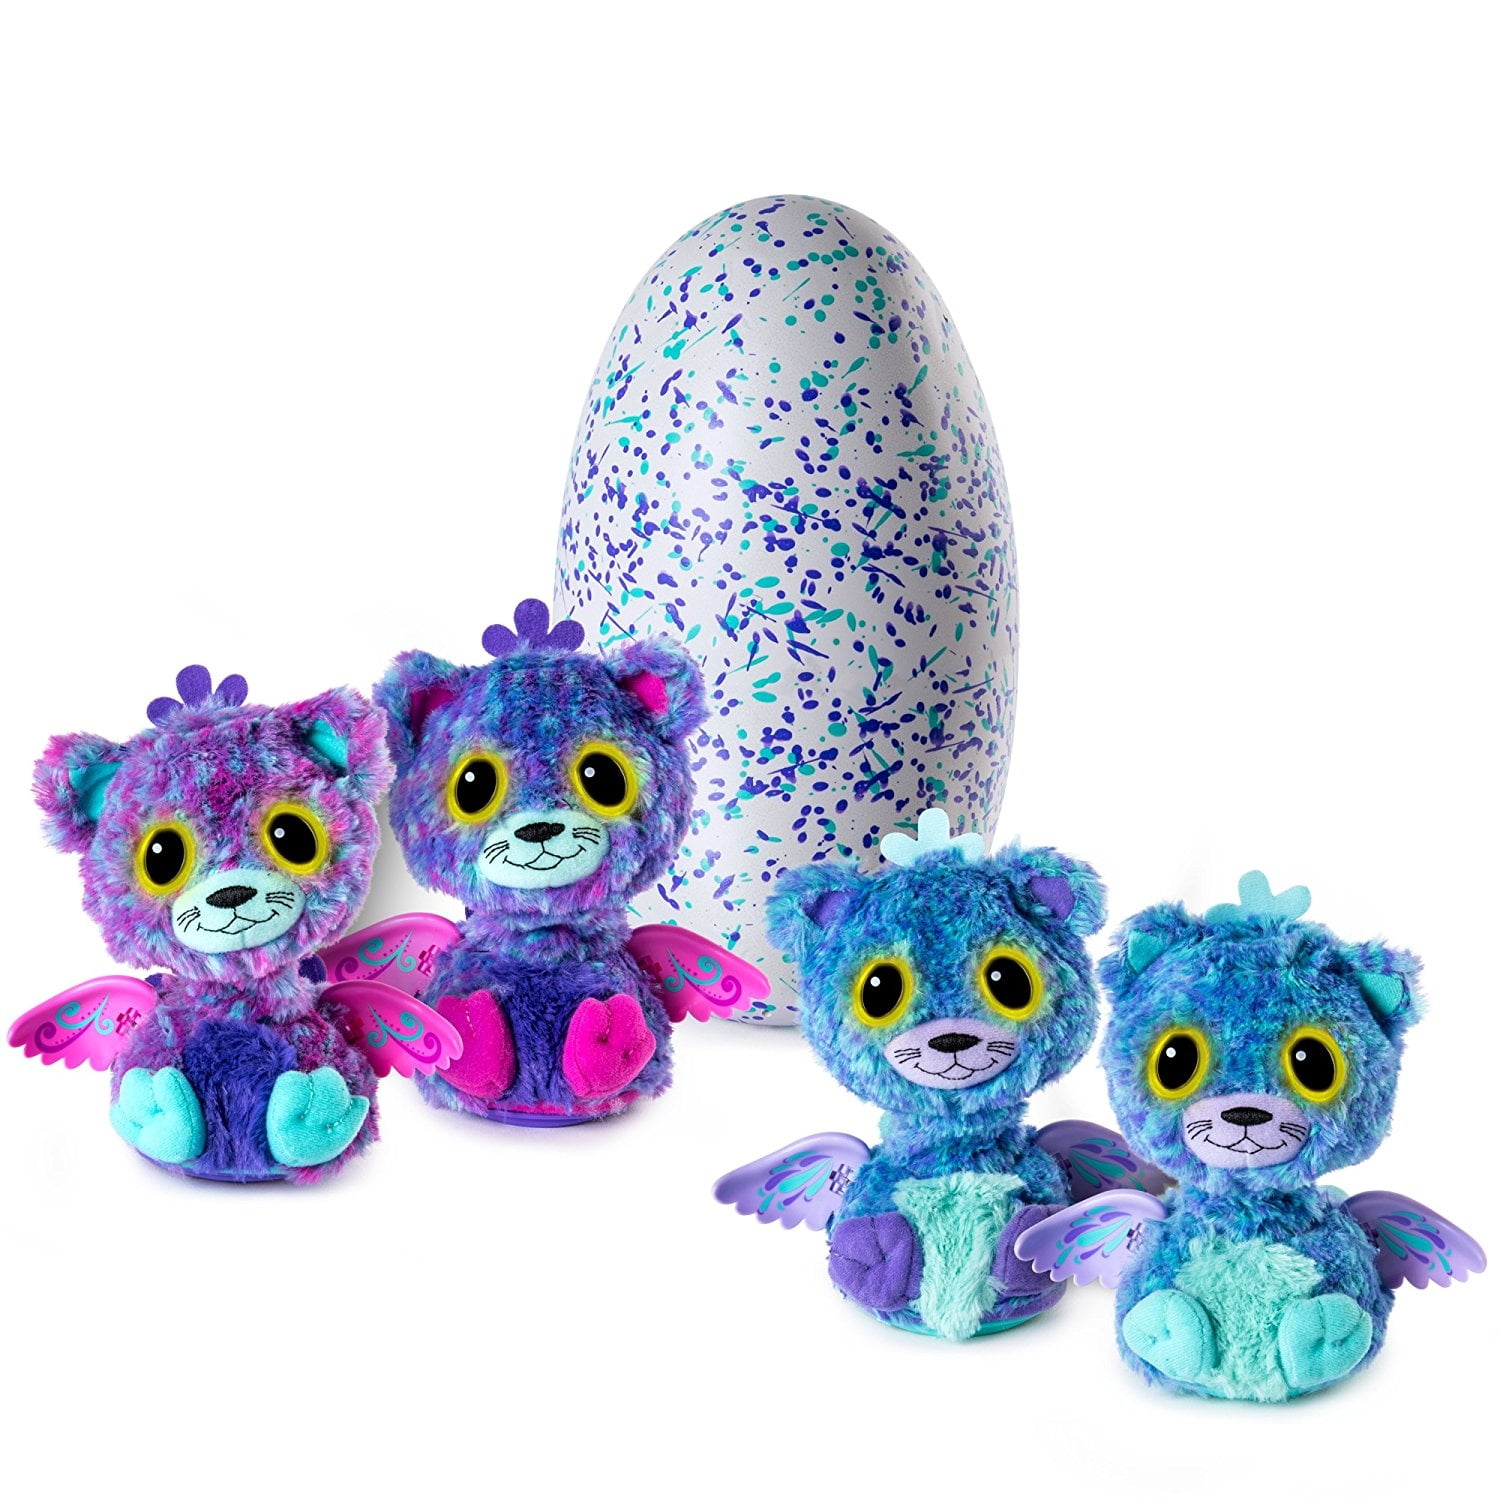 Hatchimals Surprise ? Peacat ? Hatching Egg with Surprise Twin Interactive  Hatchimal Creatures by Spin Master